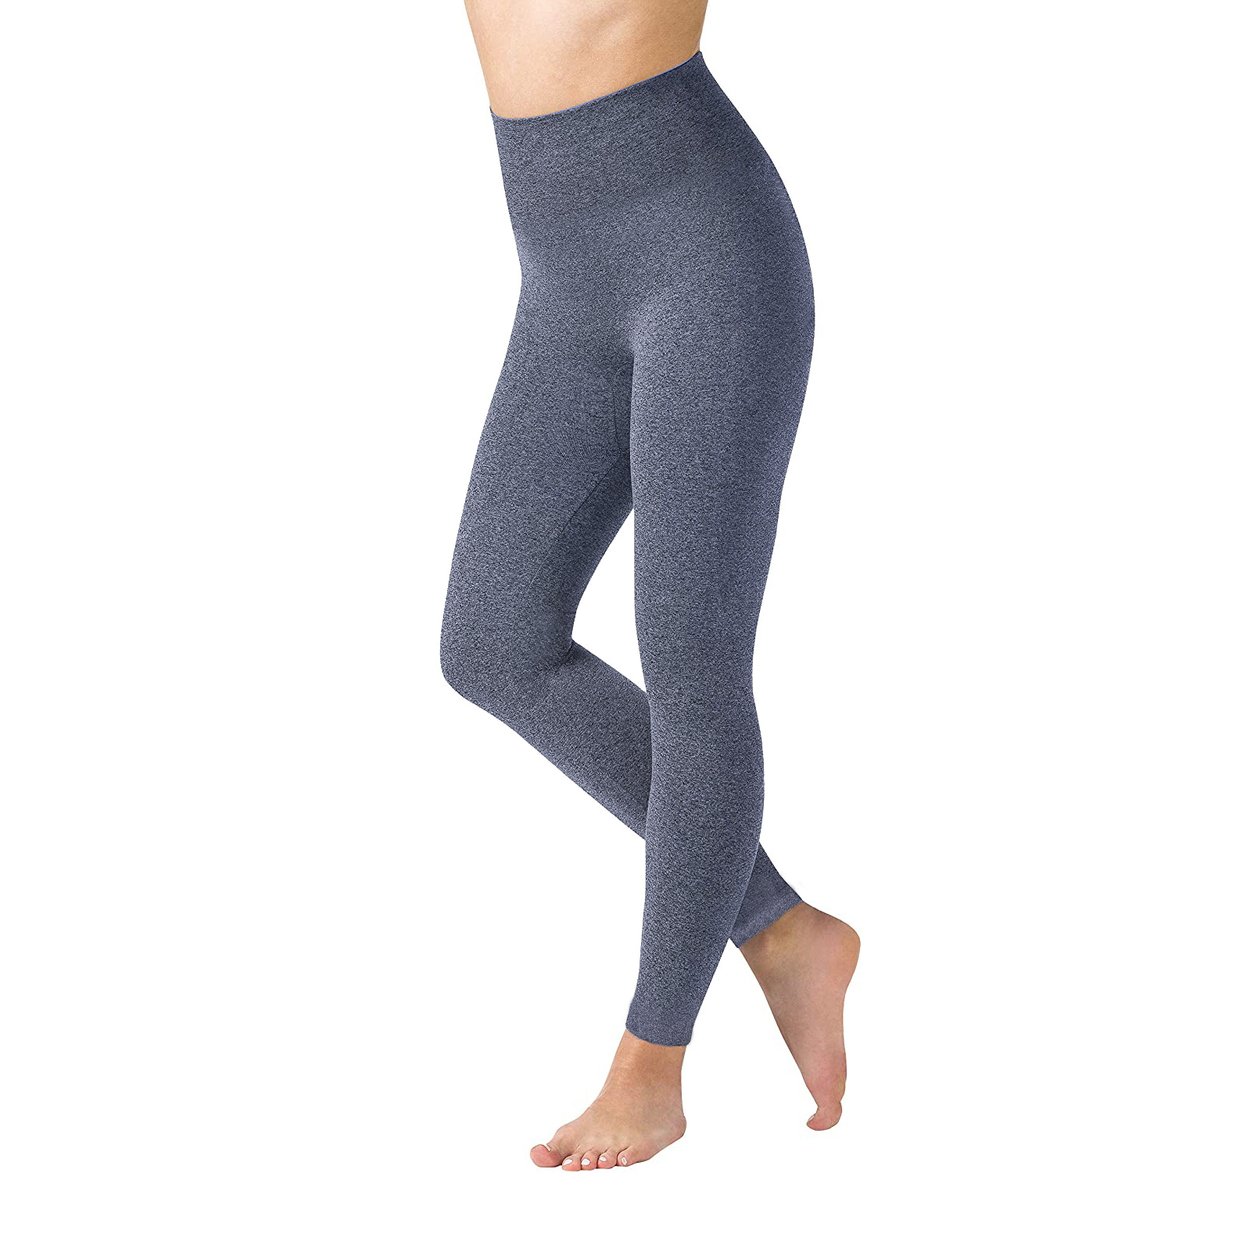 Women's High Waisted Ultra-Soft Fleece Lined Warm Marled Leggings(Available In Plus Sizes) - Navy, 2x